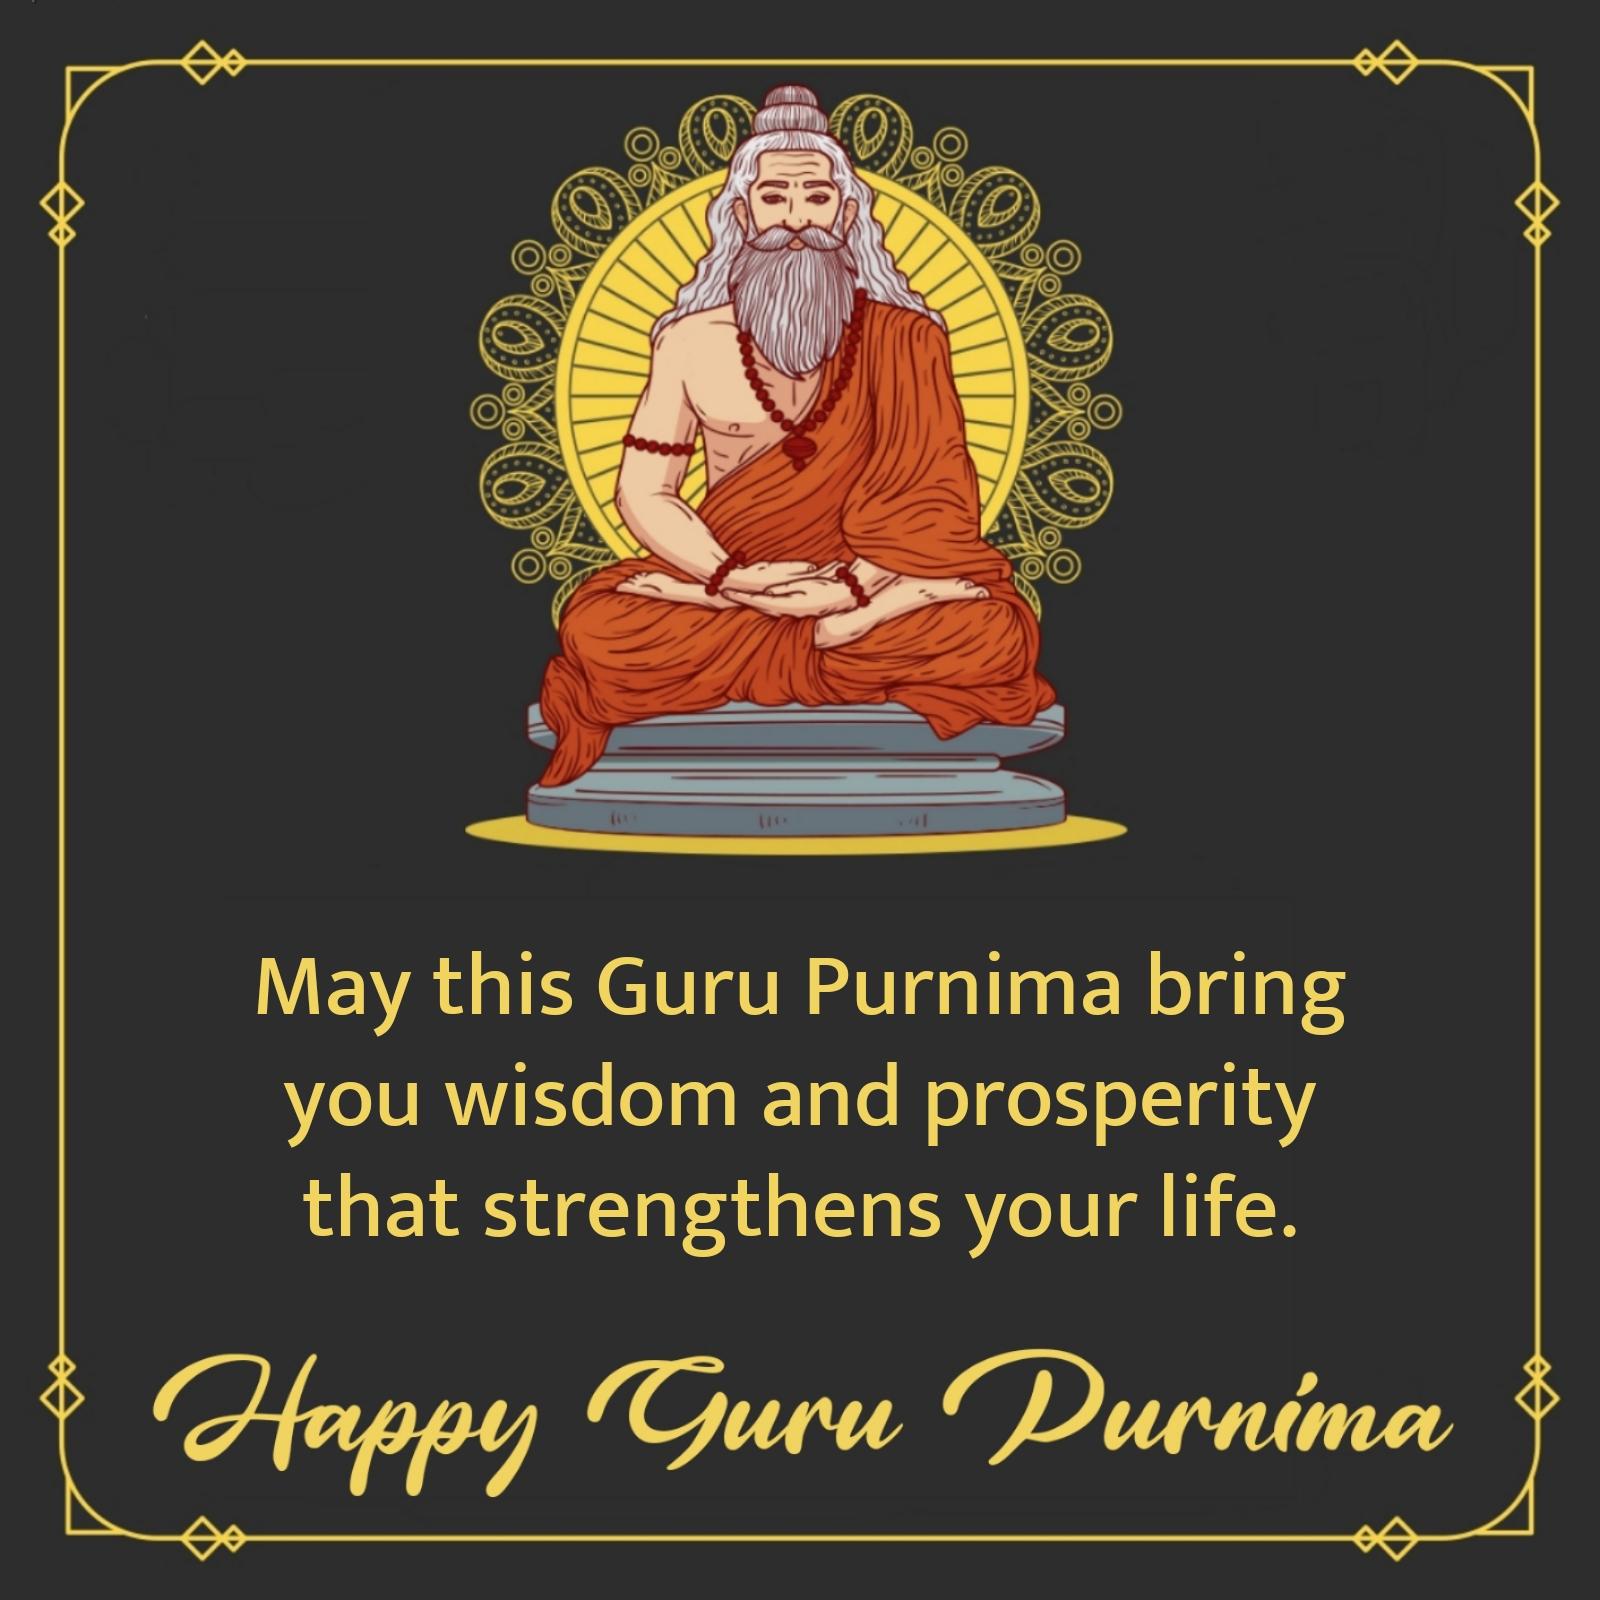 May this Guru Purnima bring you wisdom and prosperity that strengthens your life